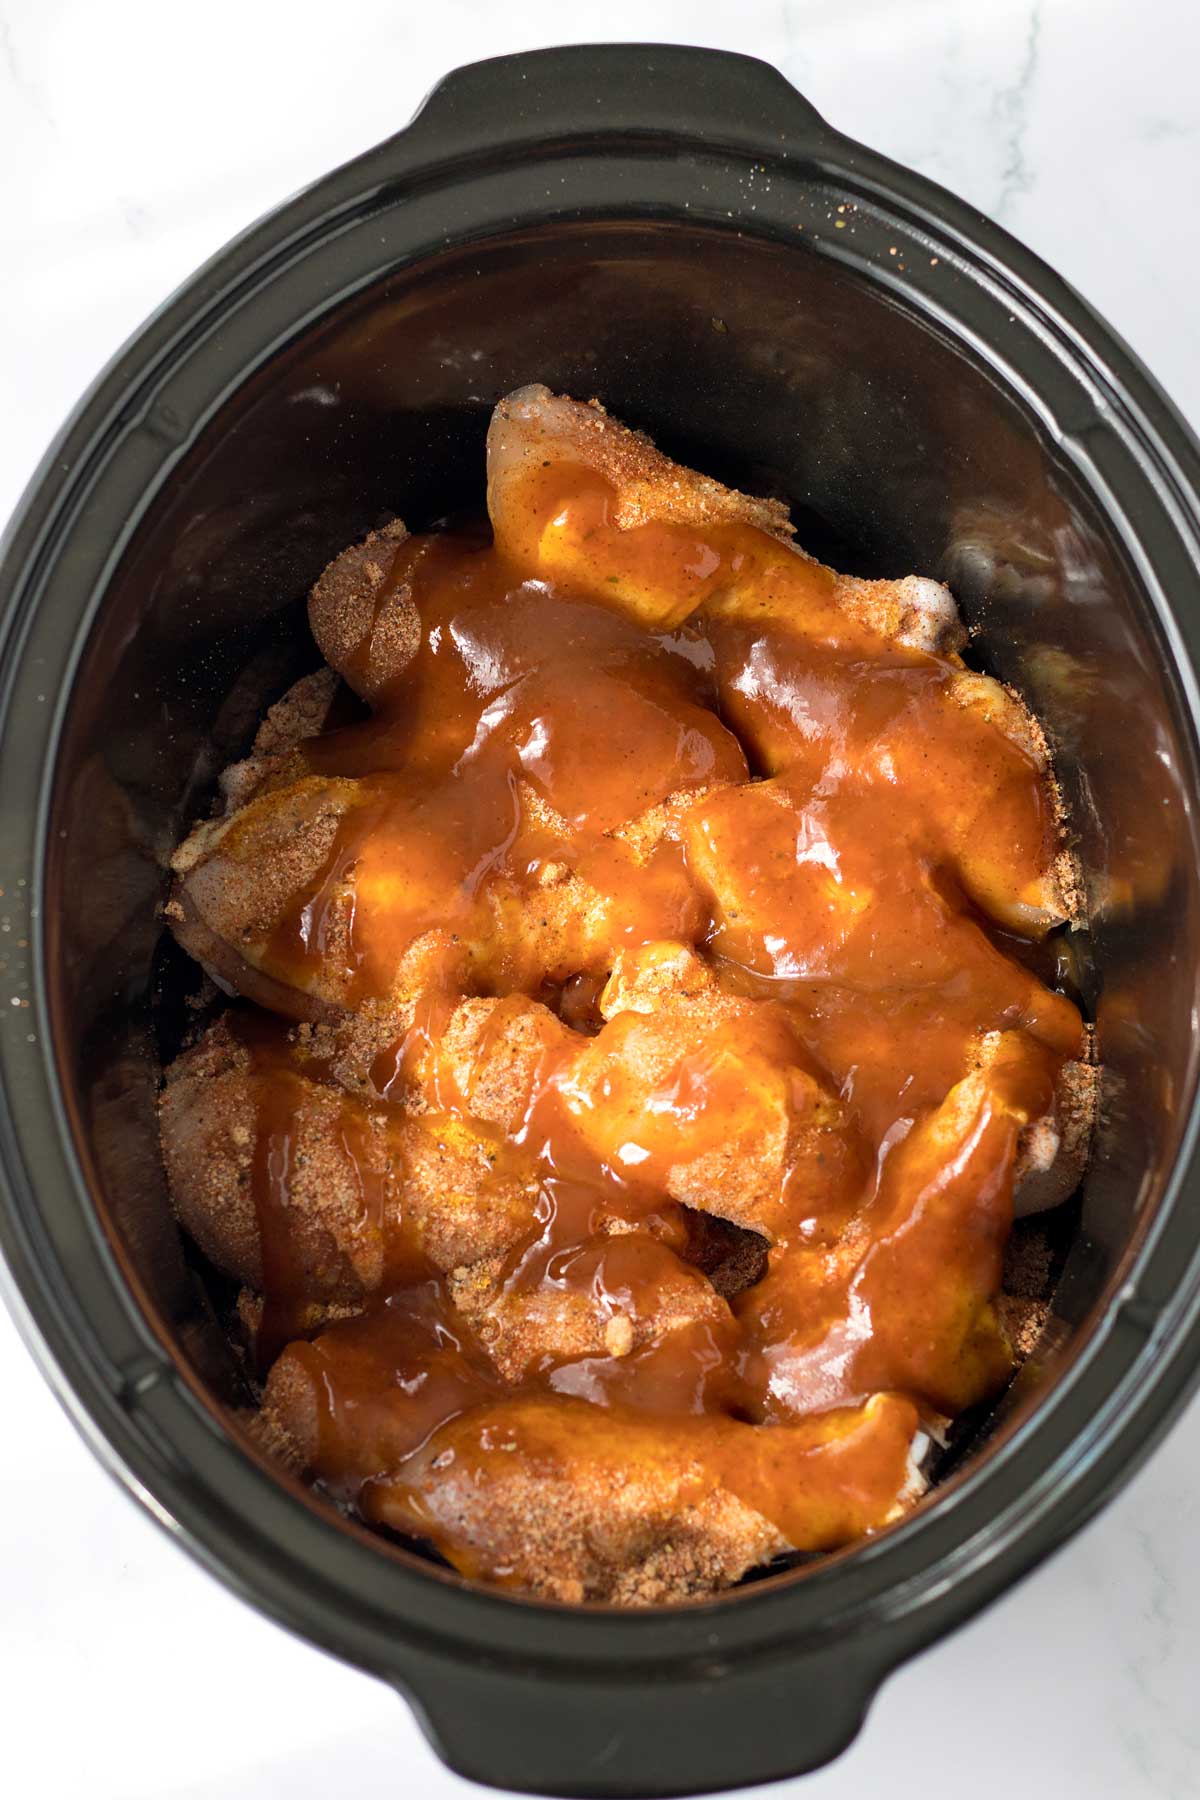 Next process in preparing Crockpot BBQ Drumsticks is to add BBQ sauce and honey to the chicken